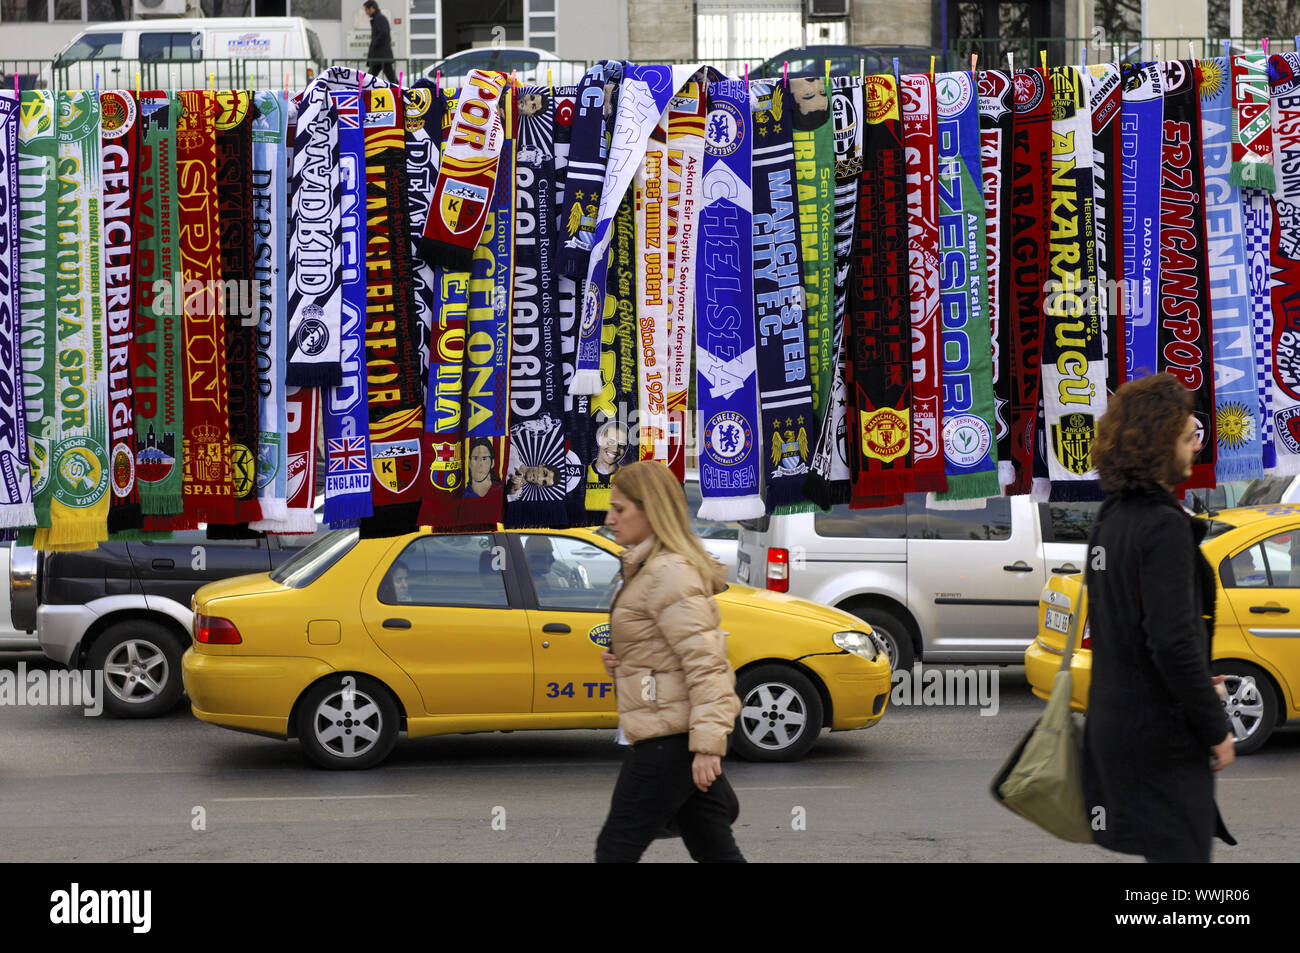 Colorful scarfs as footbal merchandise, Istanbul Stock Photo